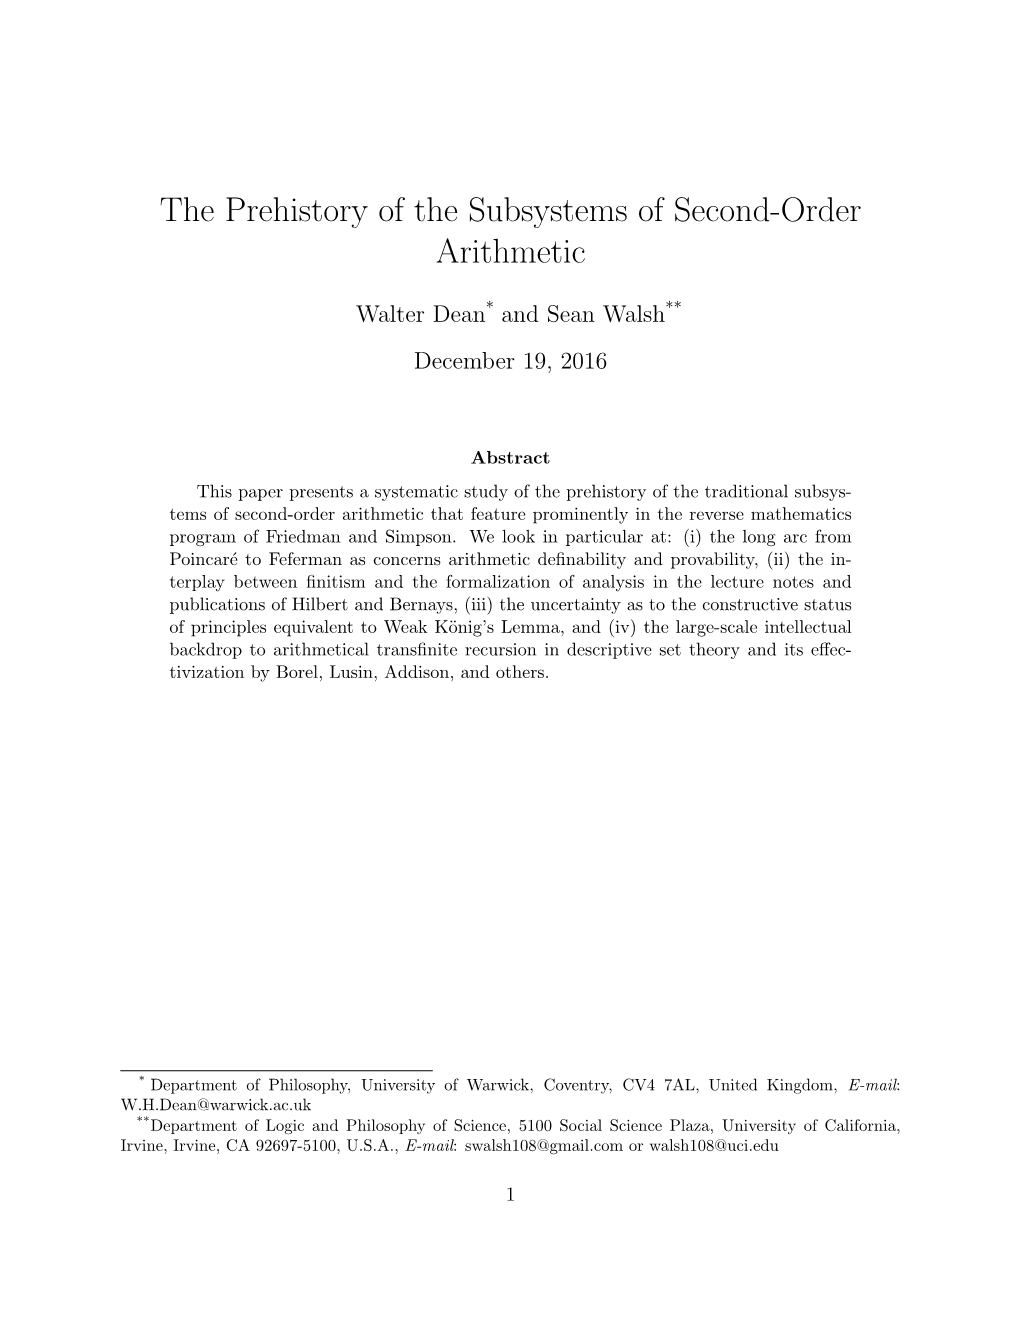 The Prehistory of the Subsystems of Second-Order Arithmetic